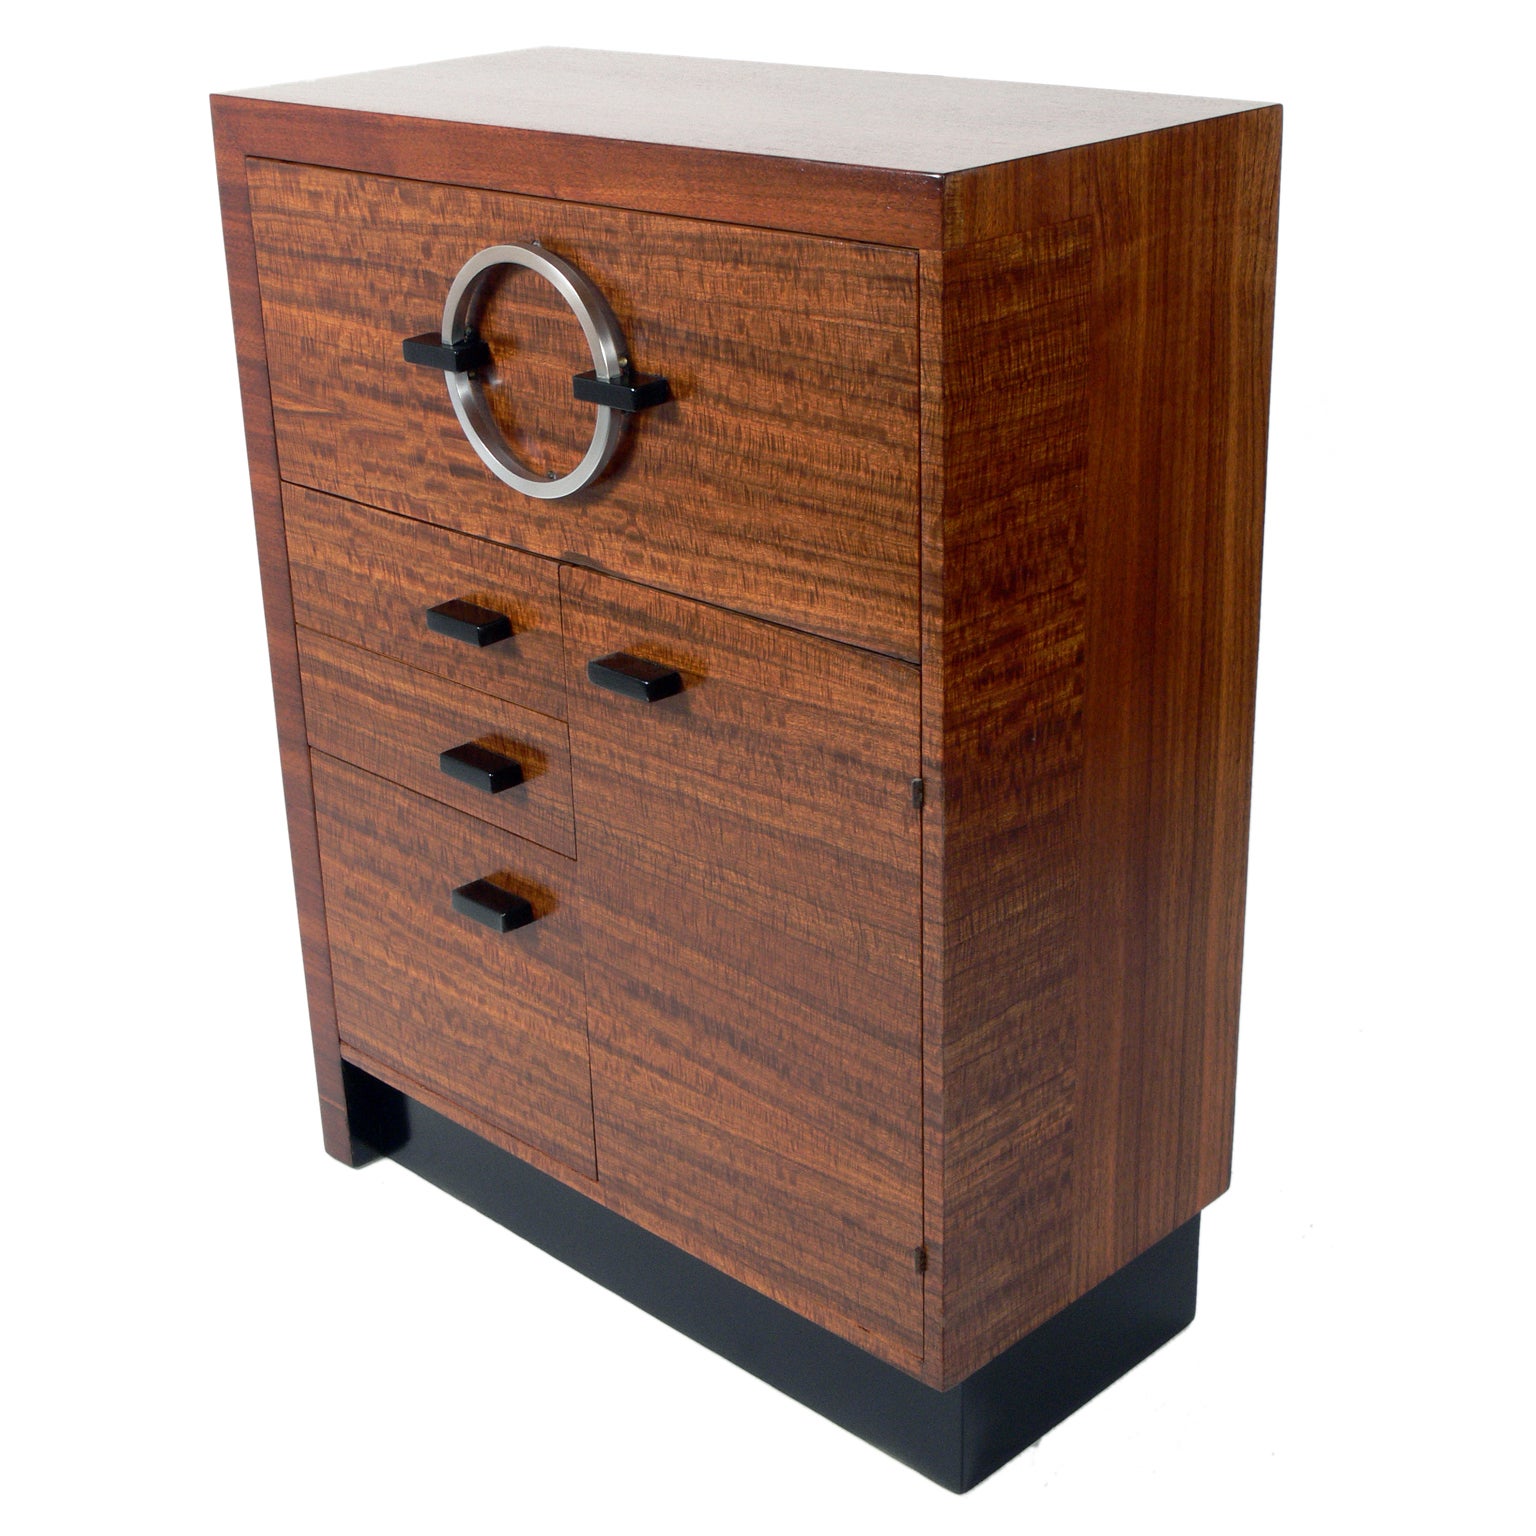 Modernist cabinet, designed by Gilbert Rohde for Herman Miller, circa 1930s. Constructed of exotic East Indian laurel wood with black lacquered trim and nickel plated metal hardware. This is a versatile pieces and can be used as a desk, cabinet,